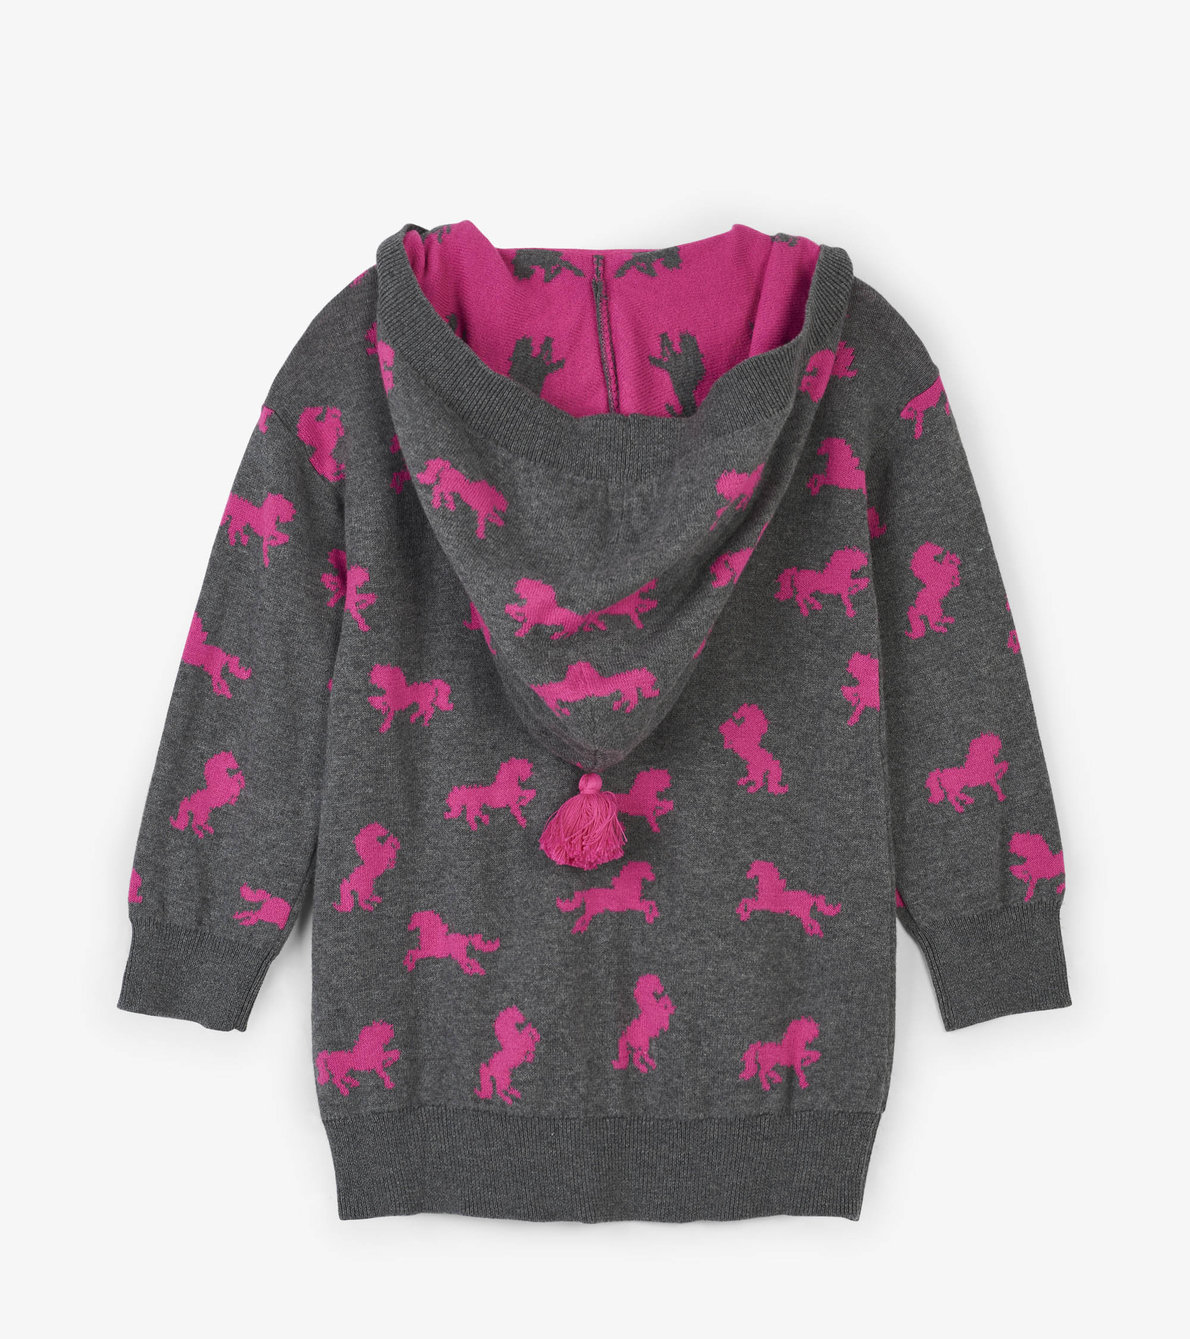 View larger image of Playful Horses Hooded Cardigan